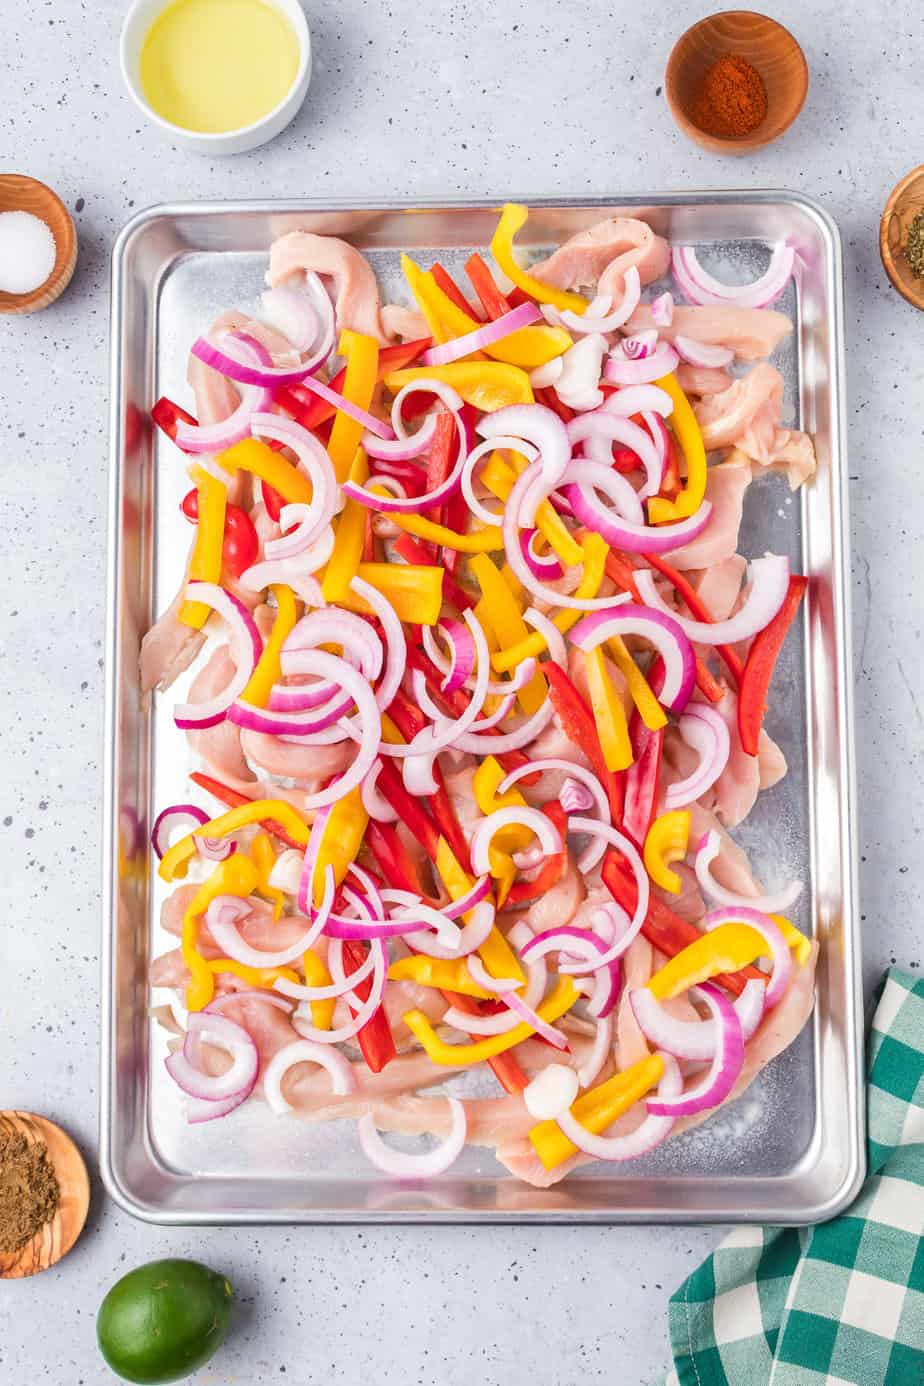 Thinly sliced raw bred and yellow bell peppers, purple onions and raw chicken on a sheet pan with other ingredients for the oil and spices in bowls nearby.